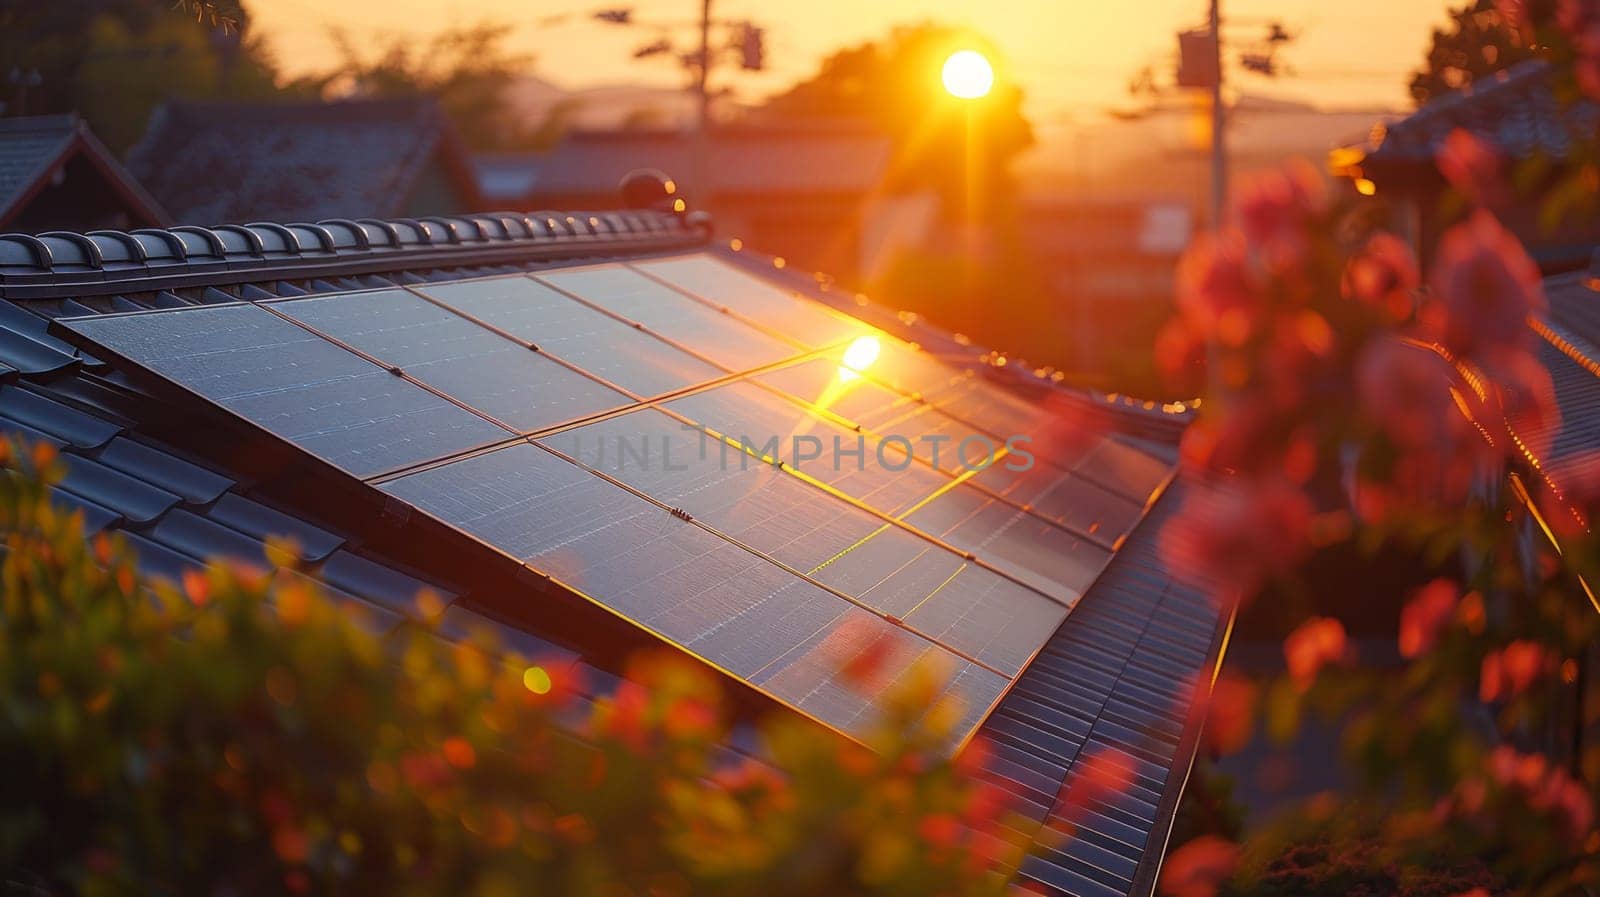 A solar panel absorbs the suns final rays on a rooftop at sunset, harnessing renewable energy for a greener world.